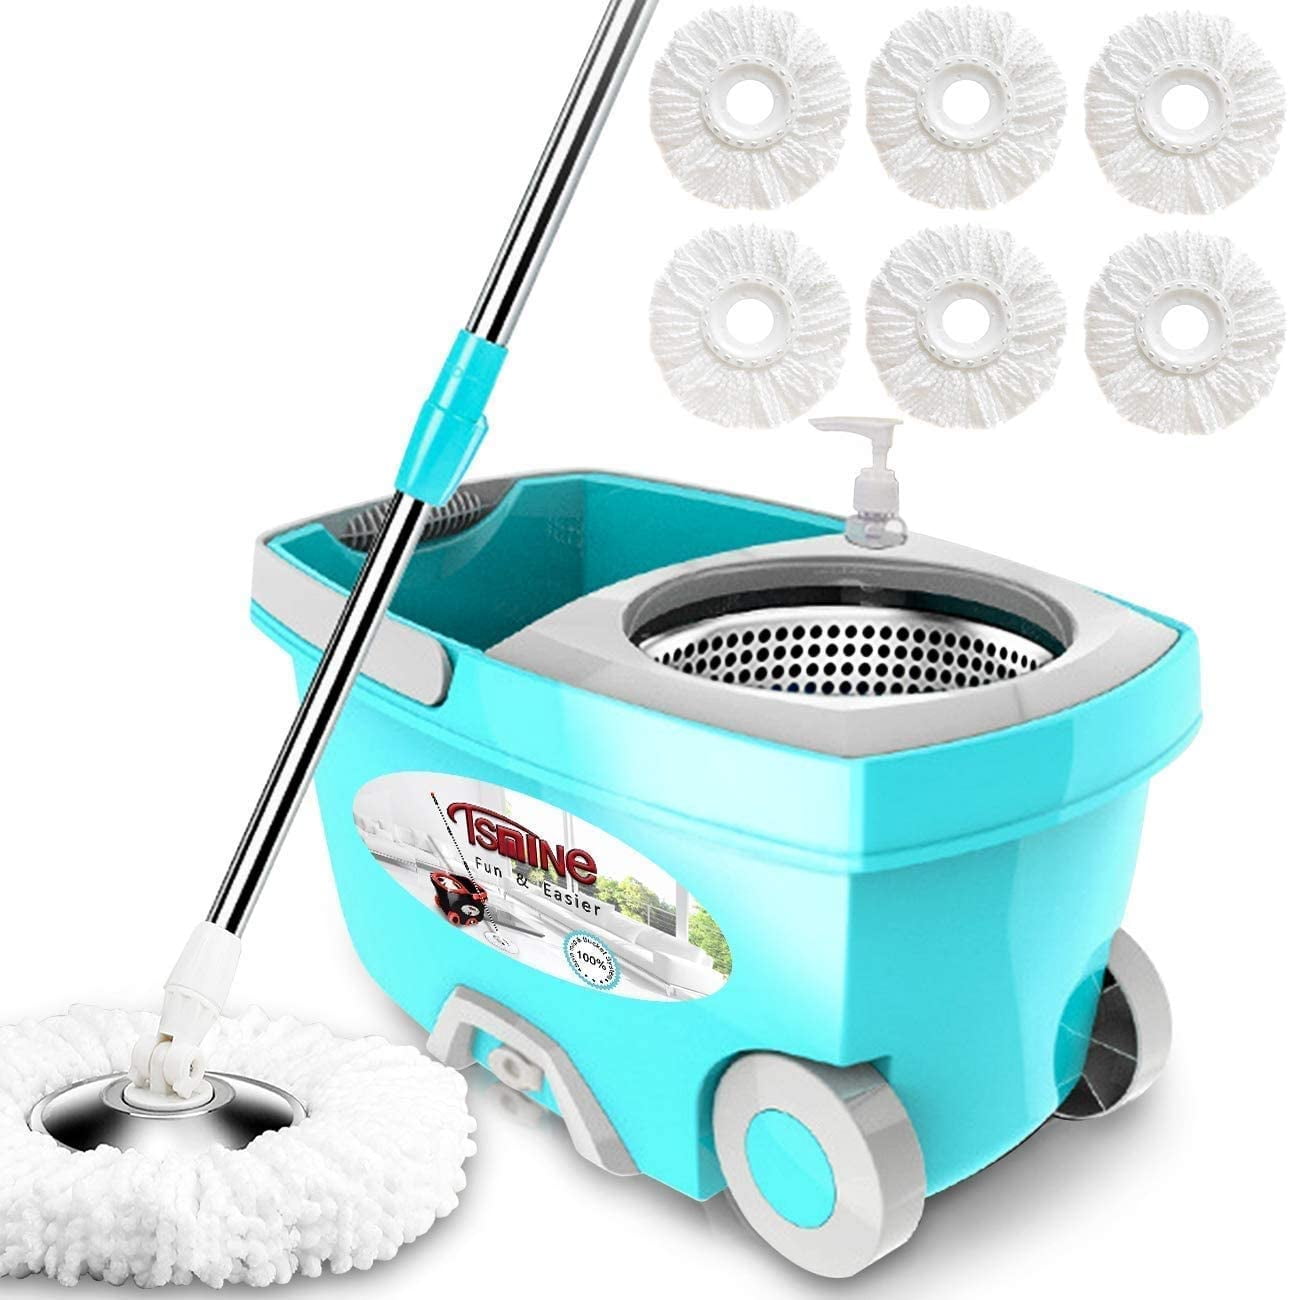 360 Degree Rotating Spinning Spin Mop Bucket Adjustable Handle 2 Cleaning Head B 